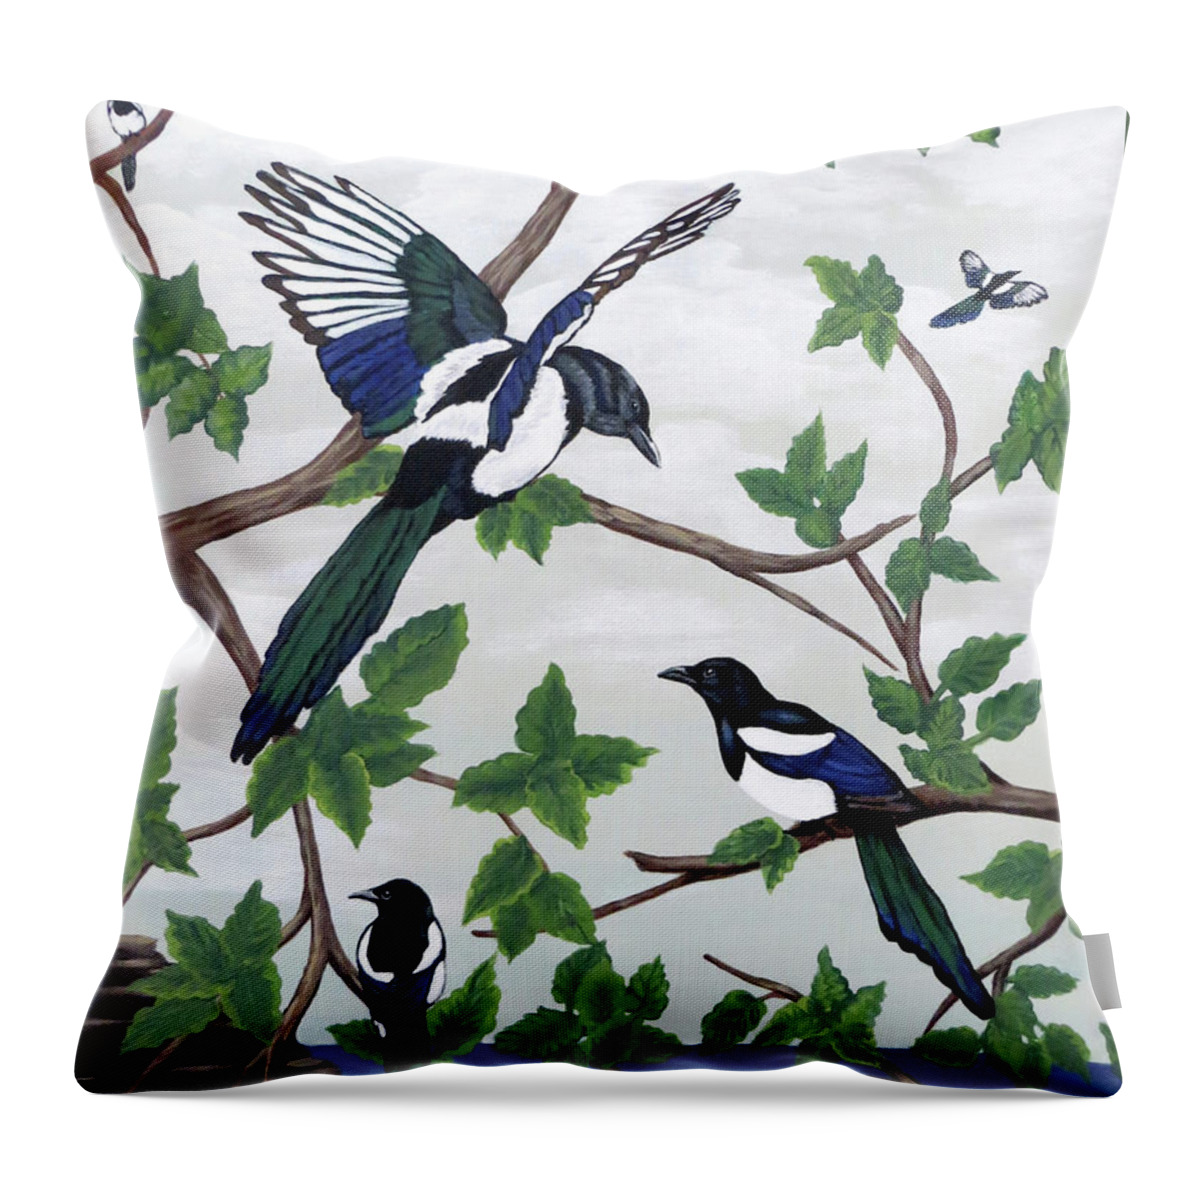 Magpies Throw Pillow featuring the painting Black Billed Magpies by Teresa Wing